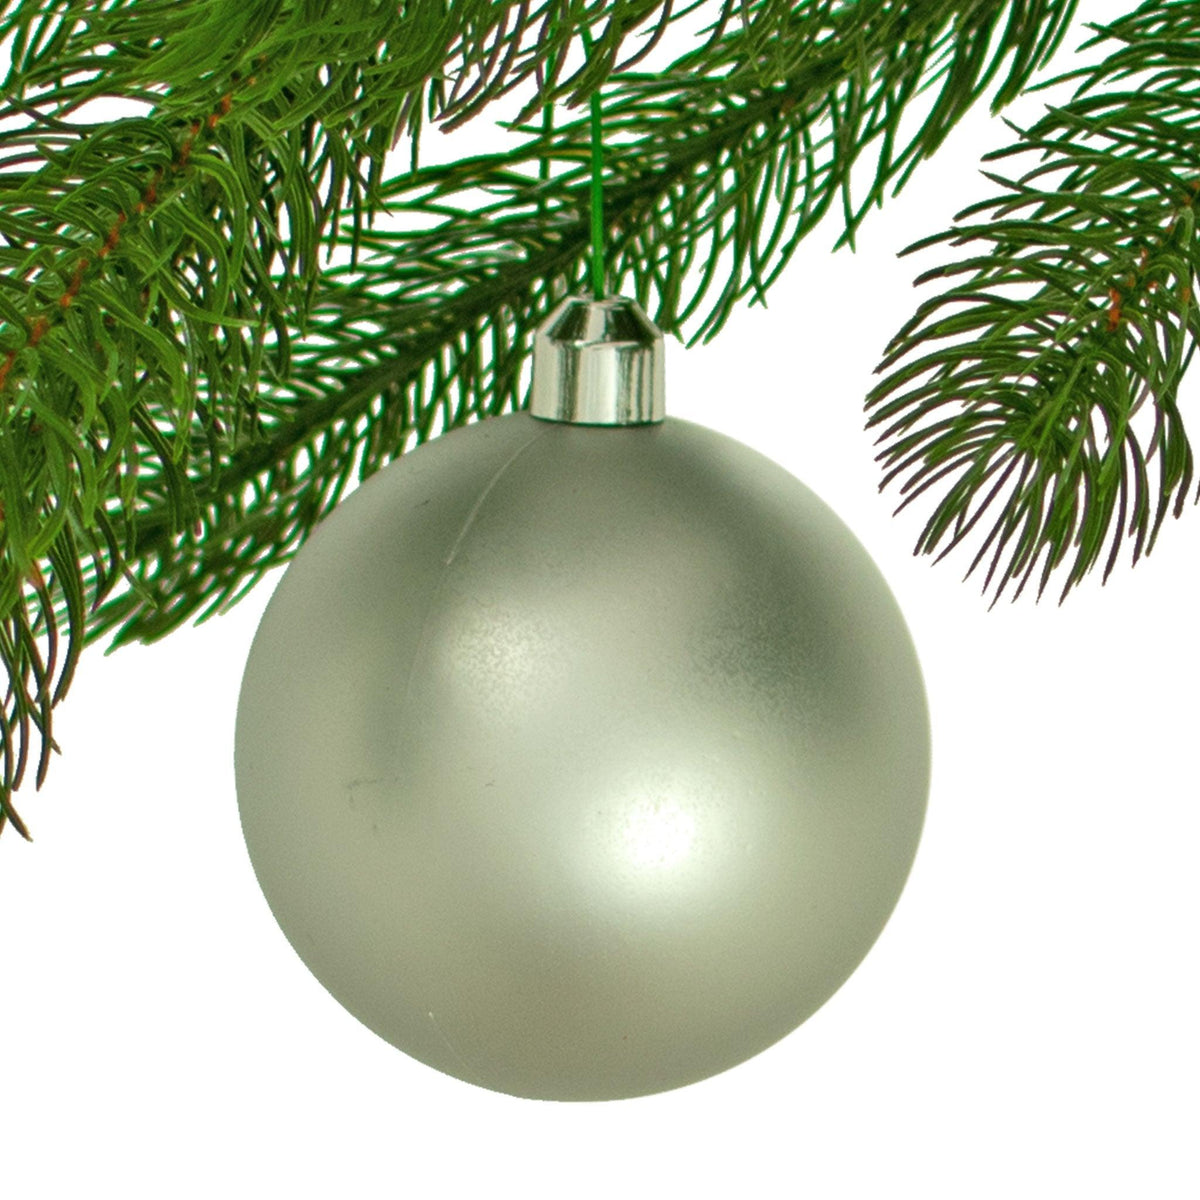 Lee Display offers brand new Shiny Matte Silver Plastic Ball Ornaments at wholesale prices for affordable Christmas Tree Hanging and Holiday Decorating on sale at leedisplay.com